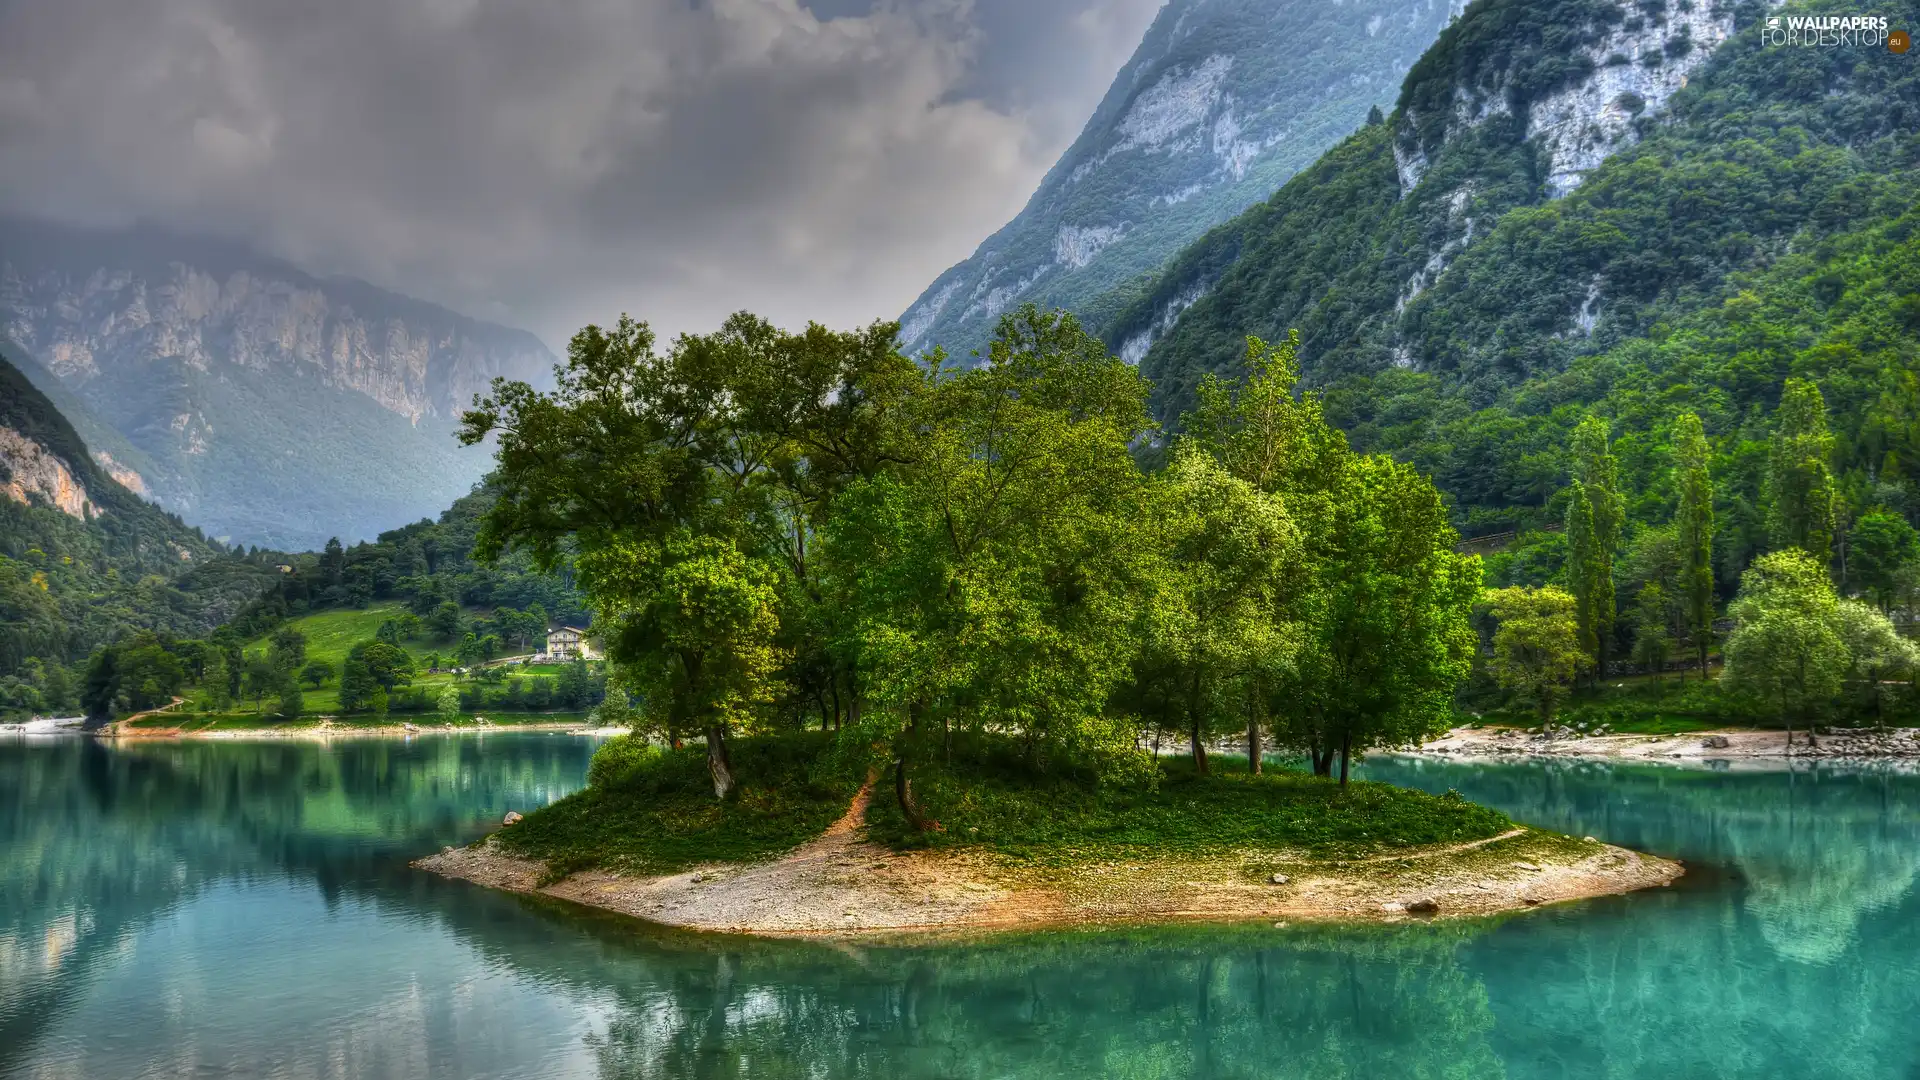 trees, Island, Mountains, lake, viewes, green ones